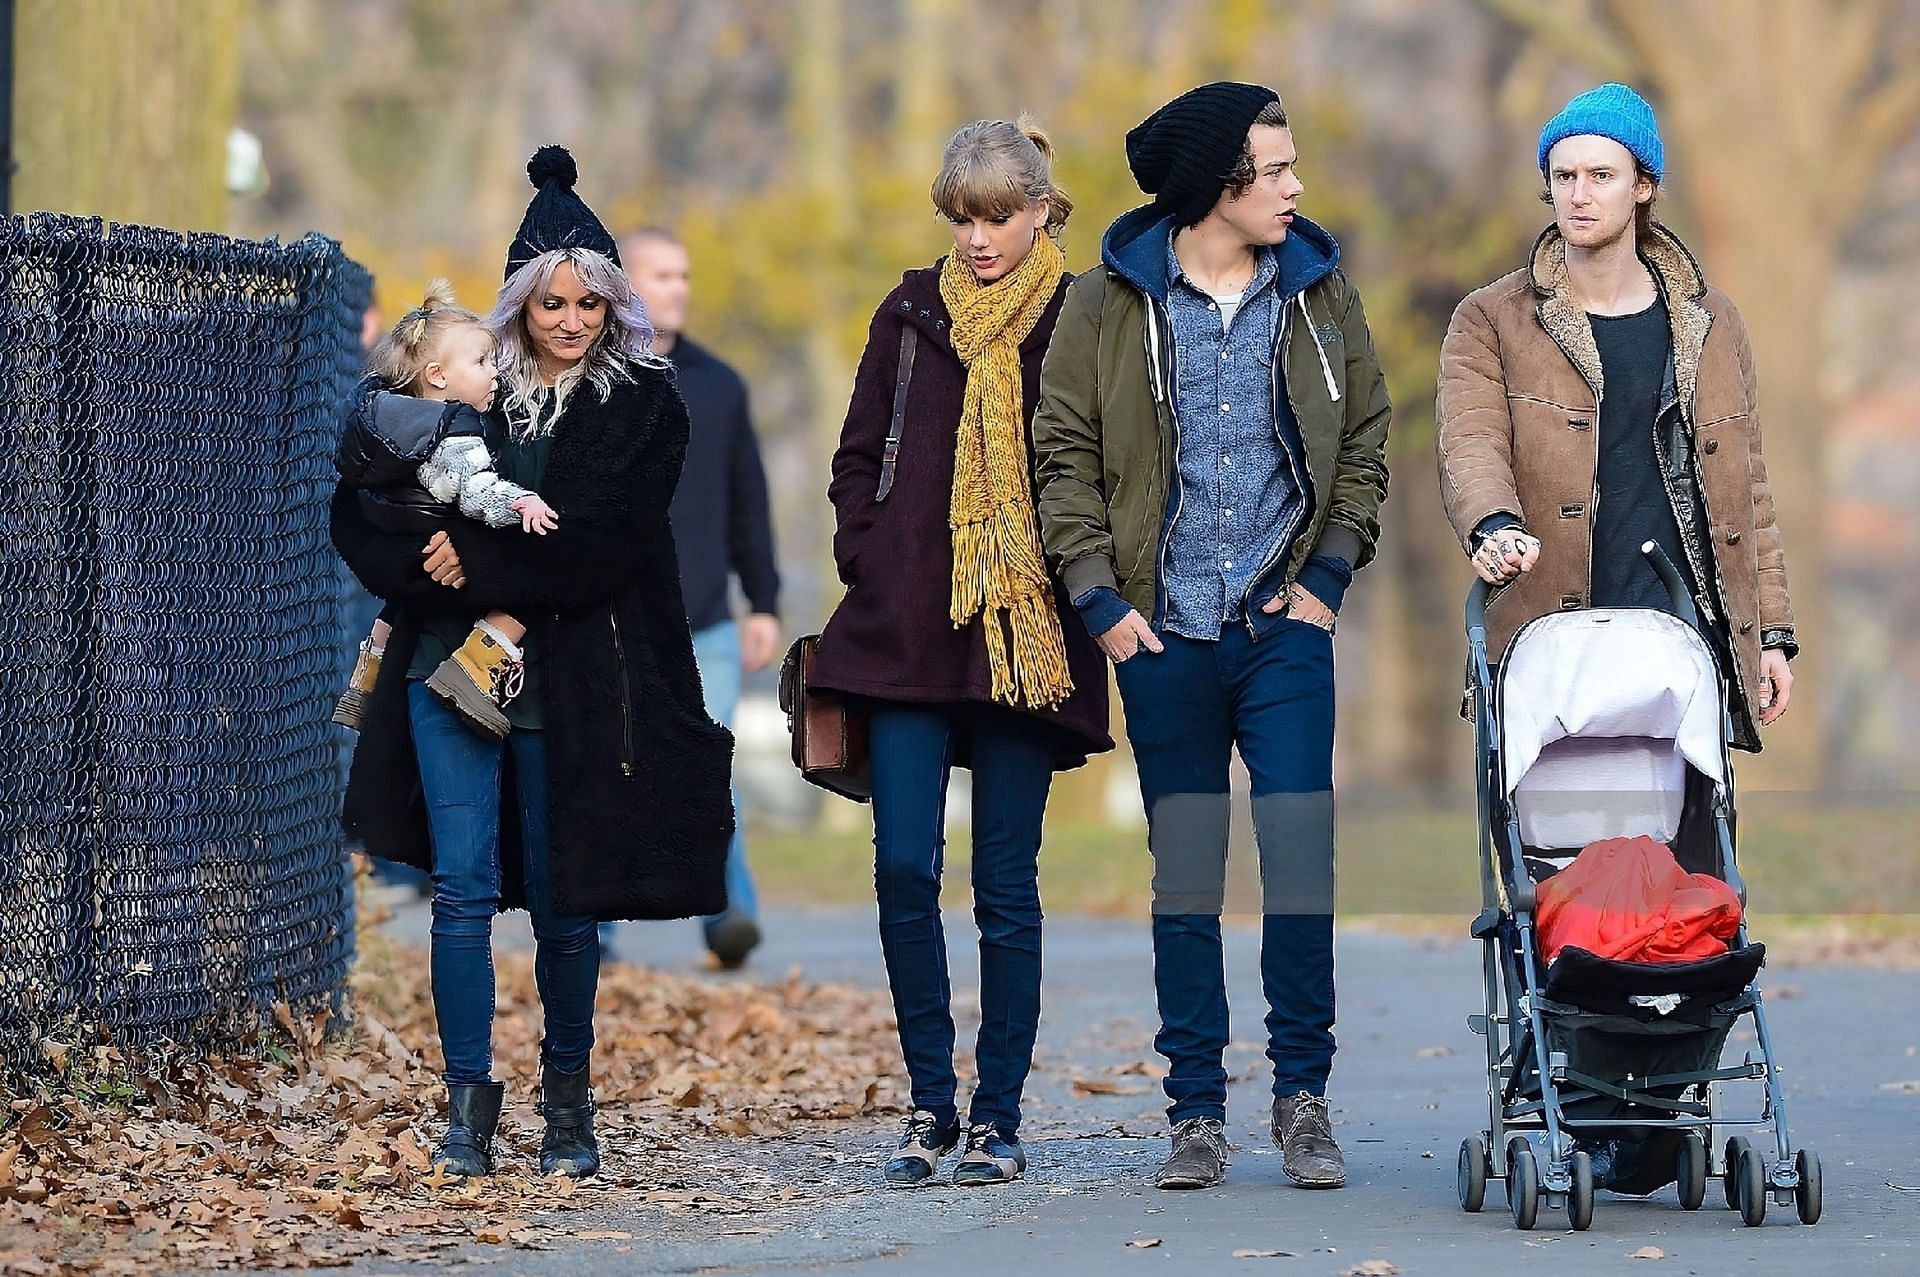 Harry Styles and Taylor Swift at Central Park,NYC (Image via Getty)